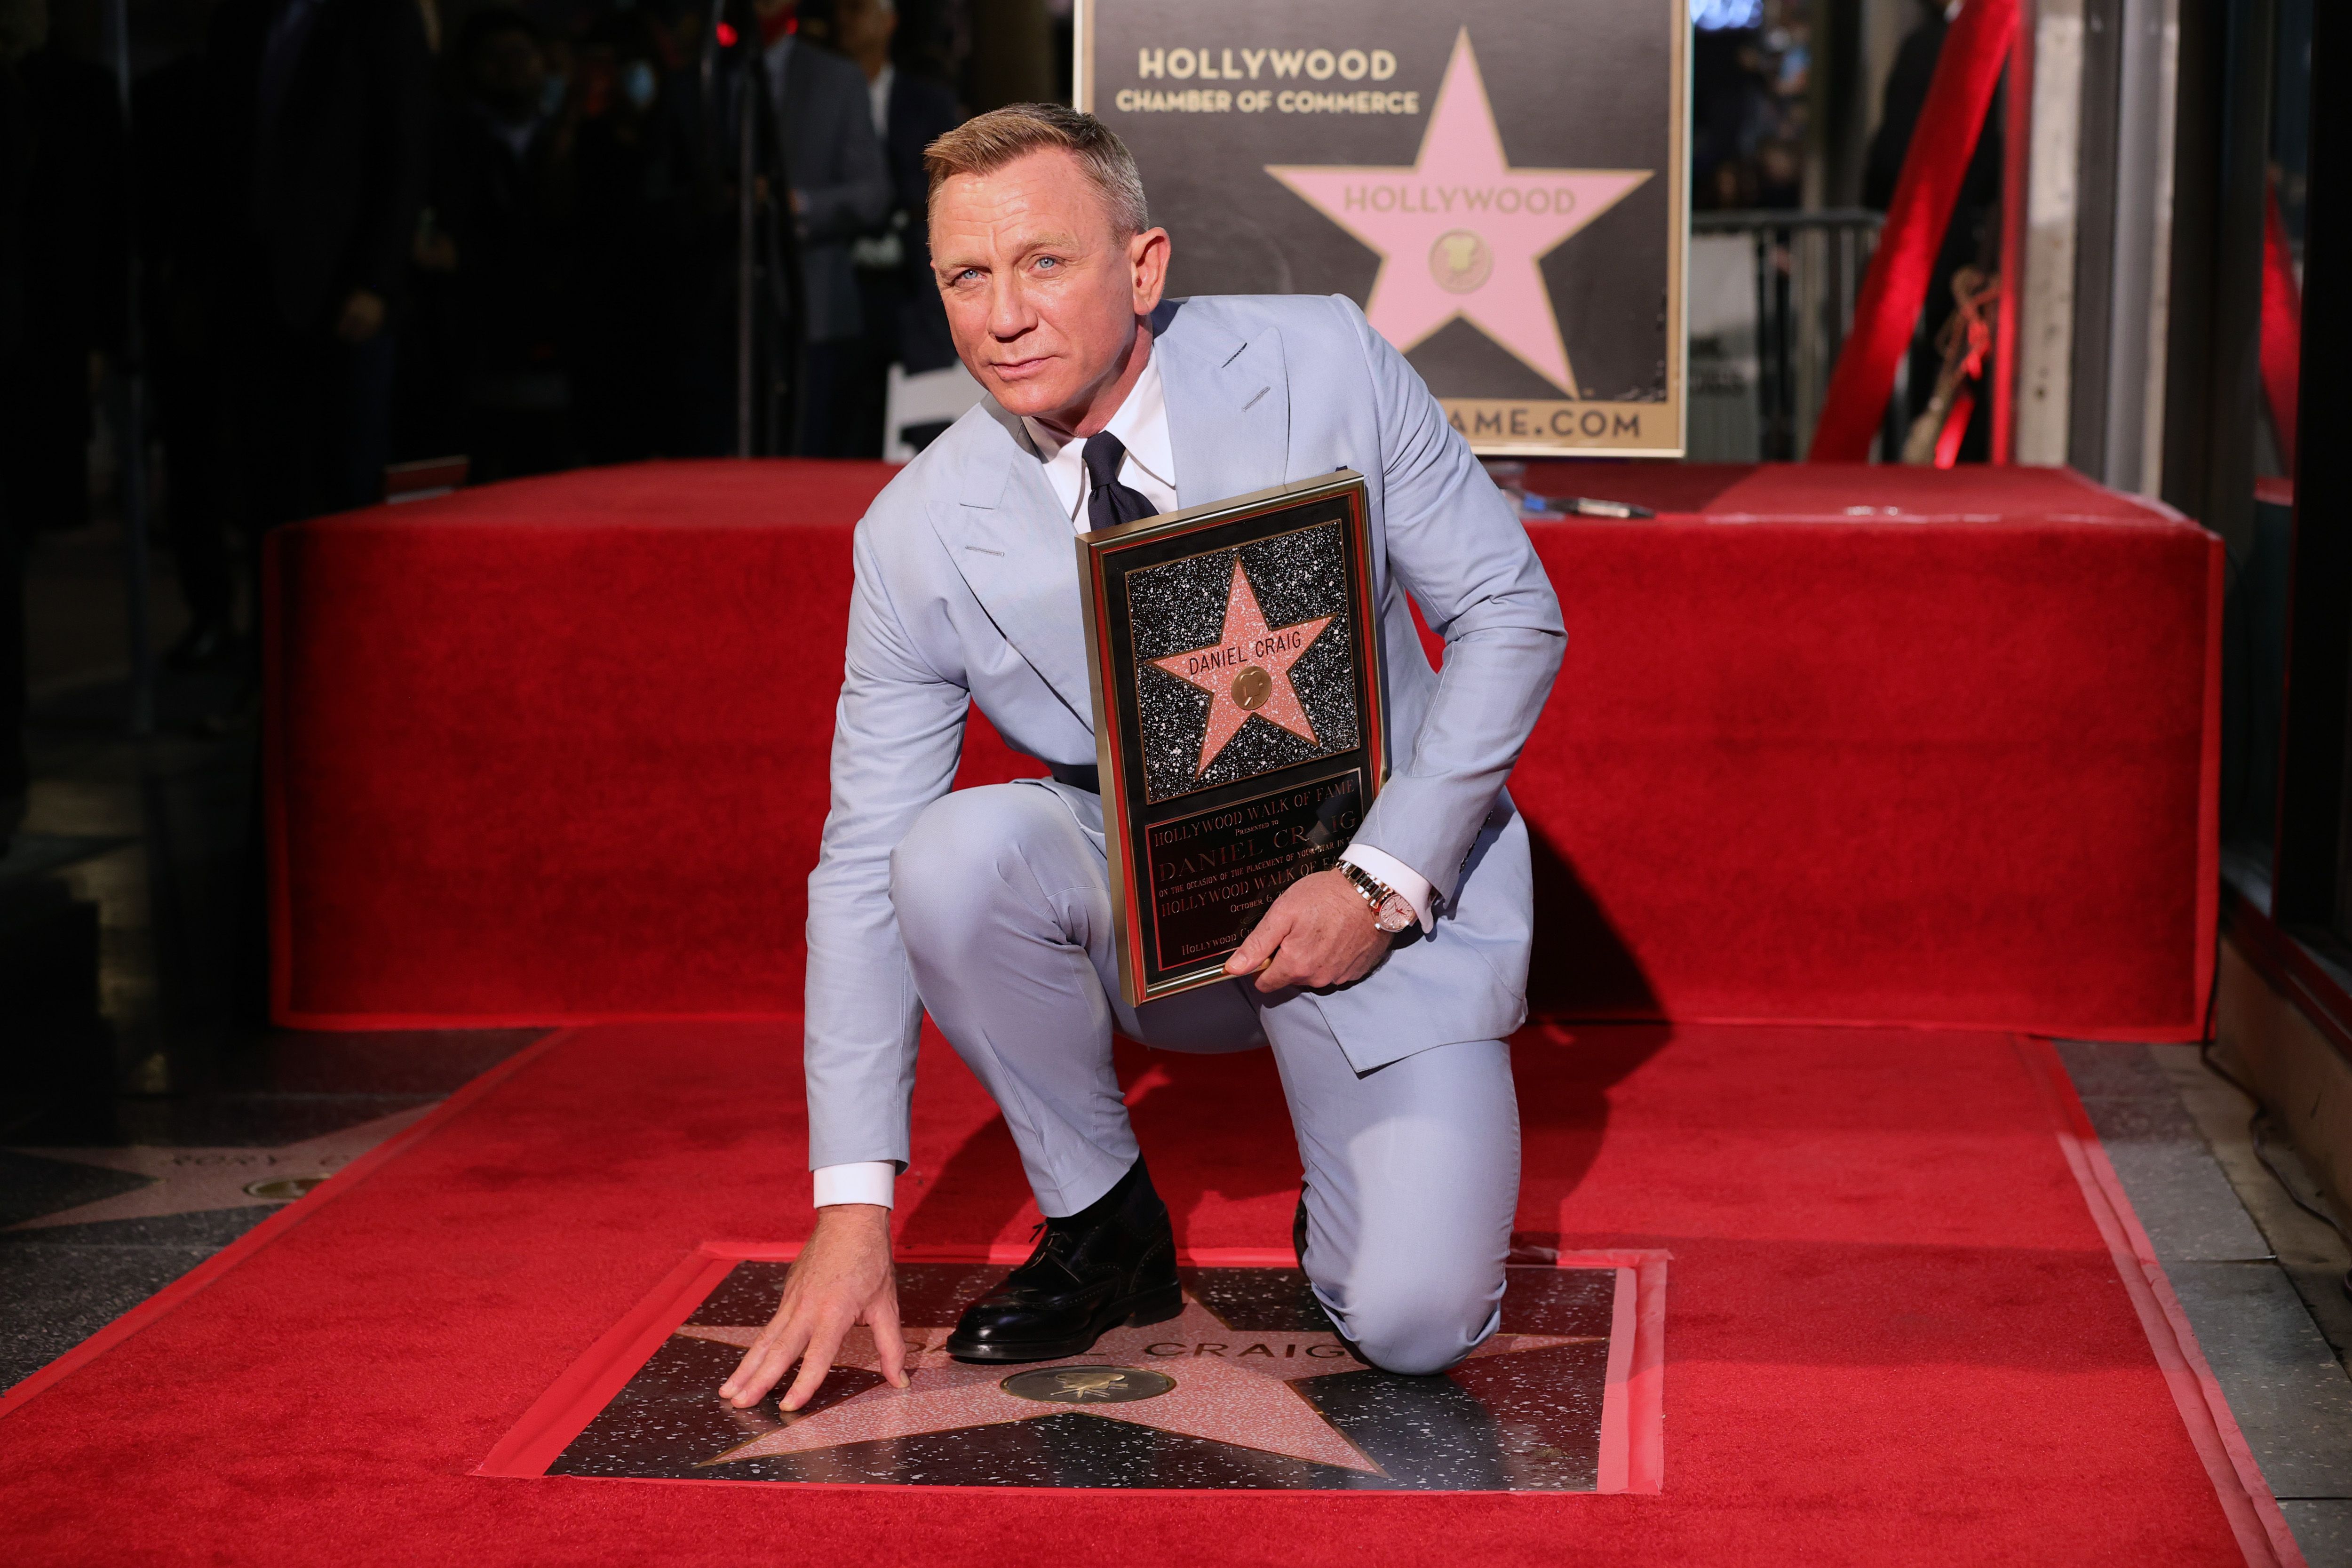 Daniel Craig poses with his star during the Hollywood Walk of Fame Star Ceremony for Daniel Craig on Oct. 6, 2021, in Hollywood, Calif. Craig's star will be located at 7007 Hollywood Boulevard, chosen for Craig's portrayal of James Bond in the 